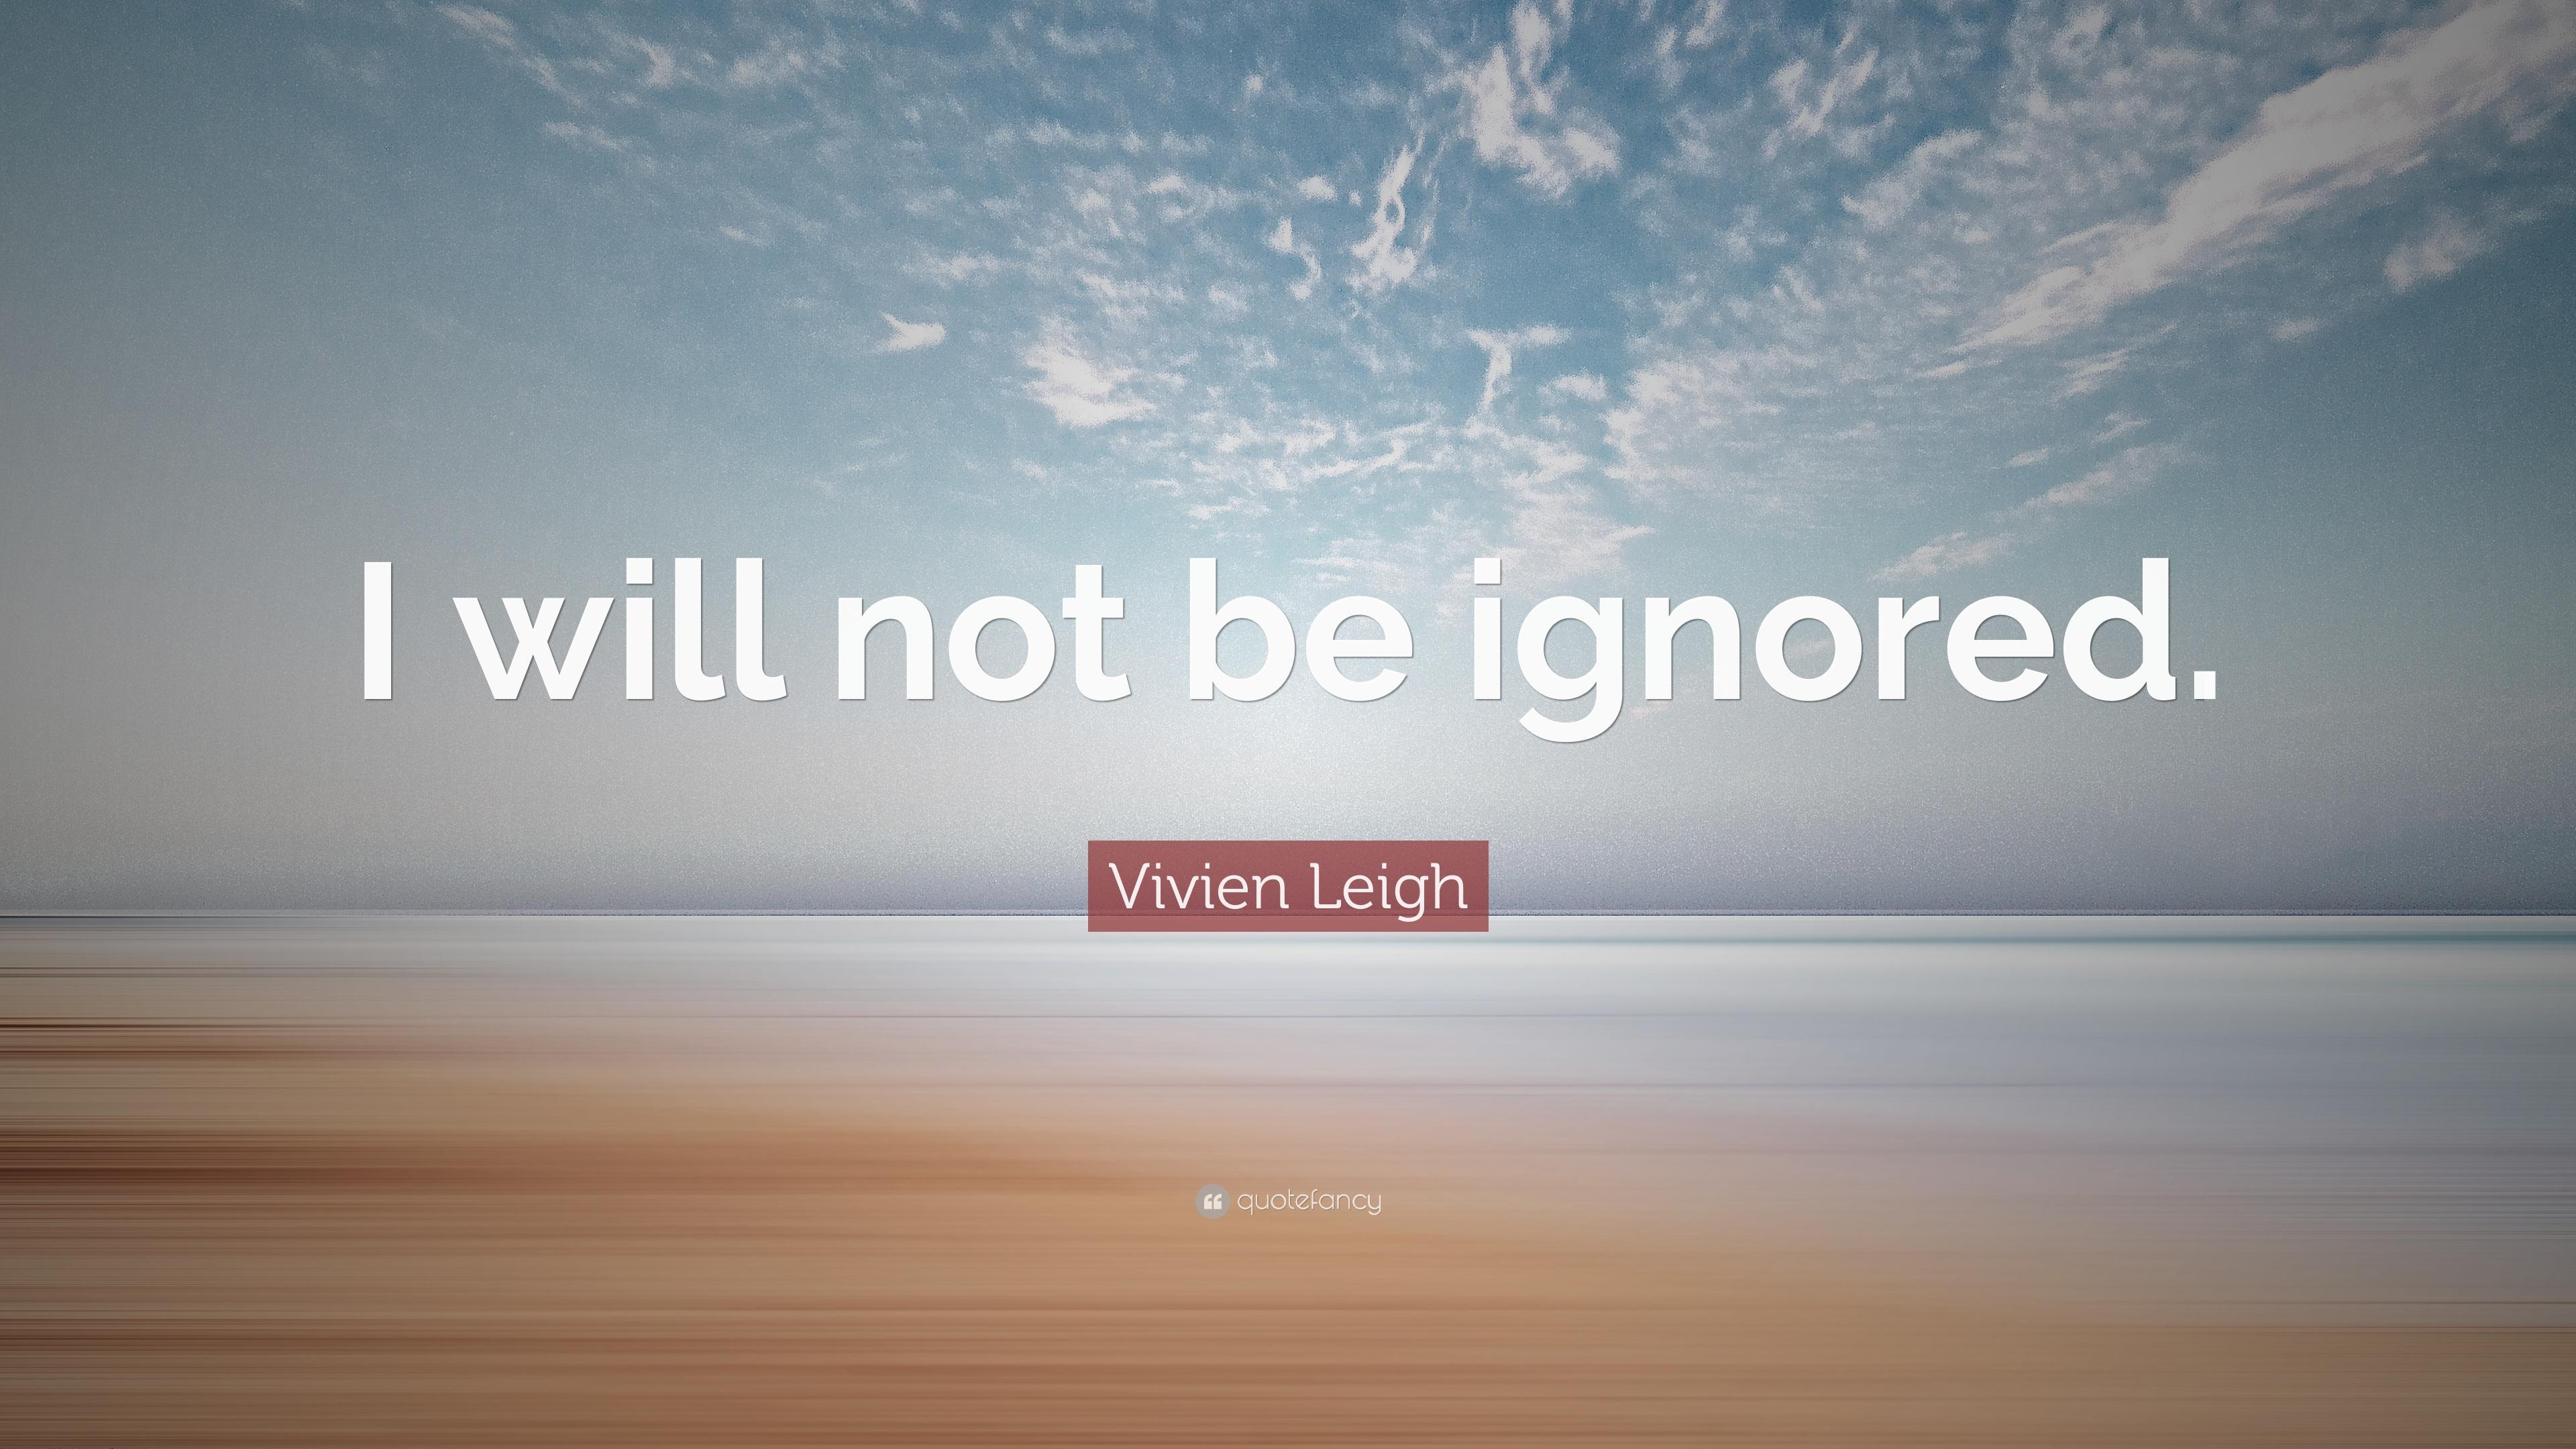 Vivien Leigh Quote: “I will not be ignored.” 12 wallpaper